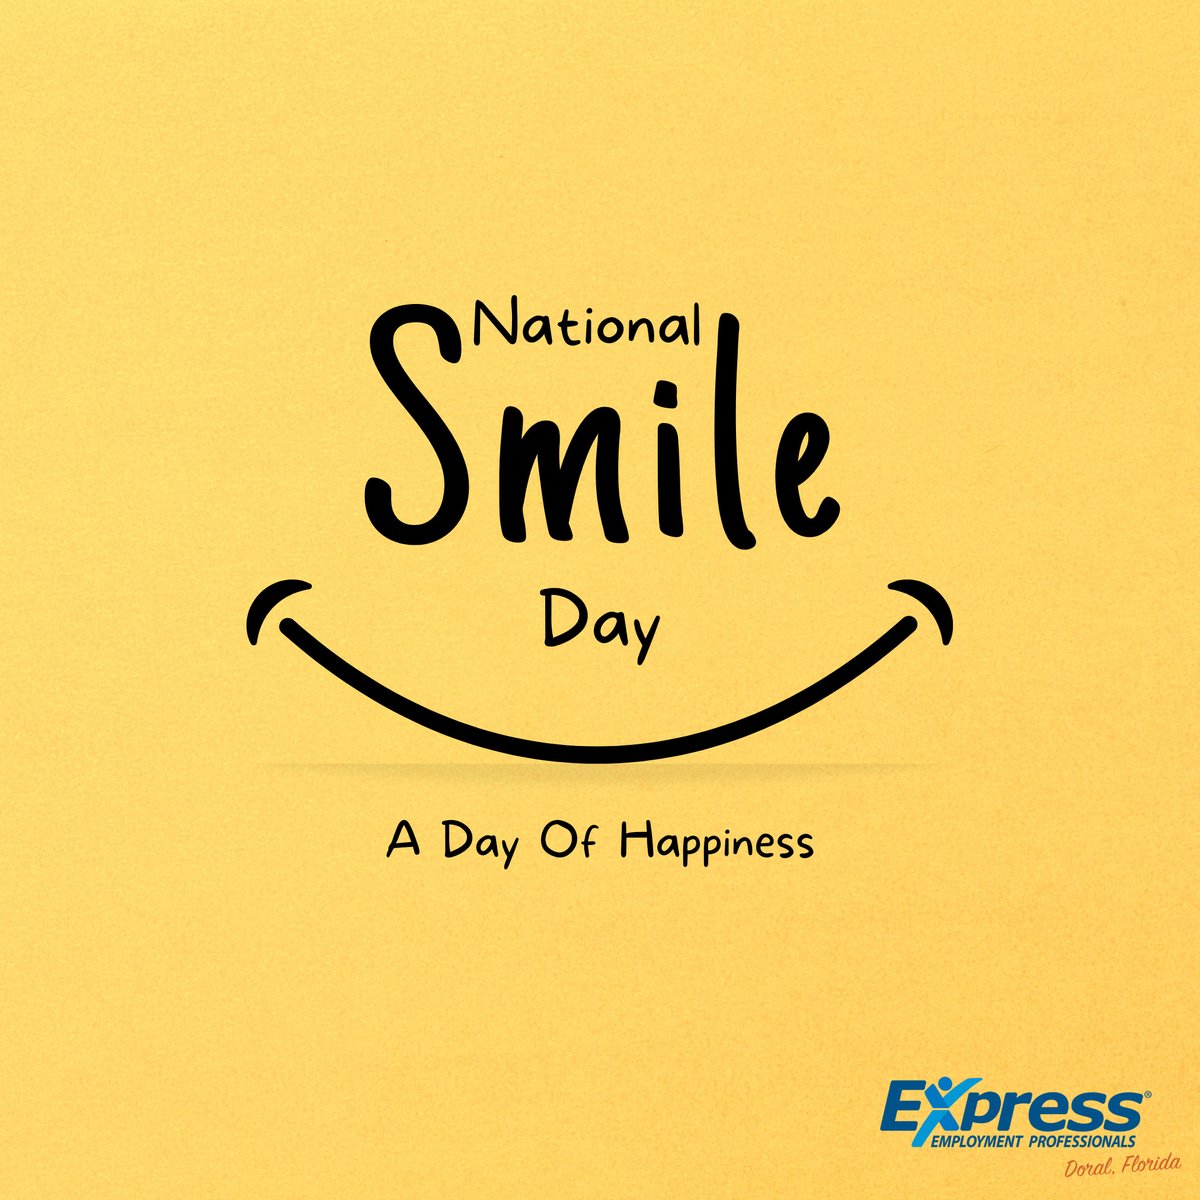 Happy National Smile Day!!

For all your staffing needs do not hesitate in contacting us.

Email: jobs.miamifl@expresspros.com
Phone: (305) 418-8462

#expresspros #nationalsmileday #celebrateeveryday #doral #doraljobs #employment #staffing